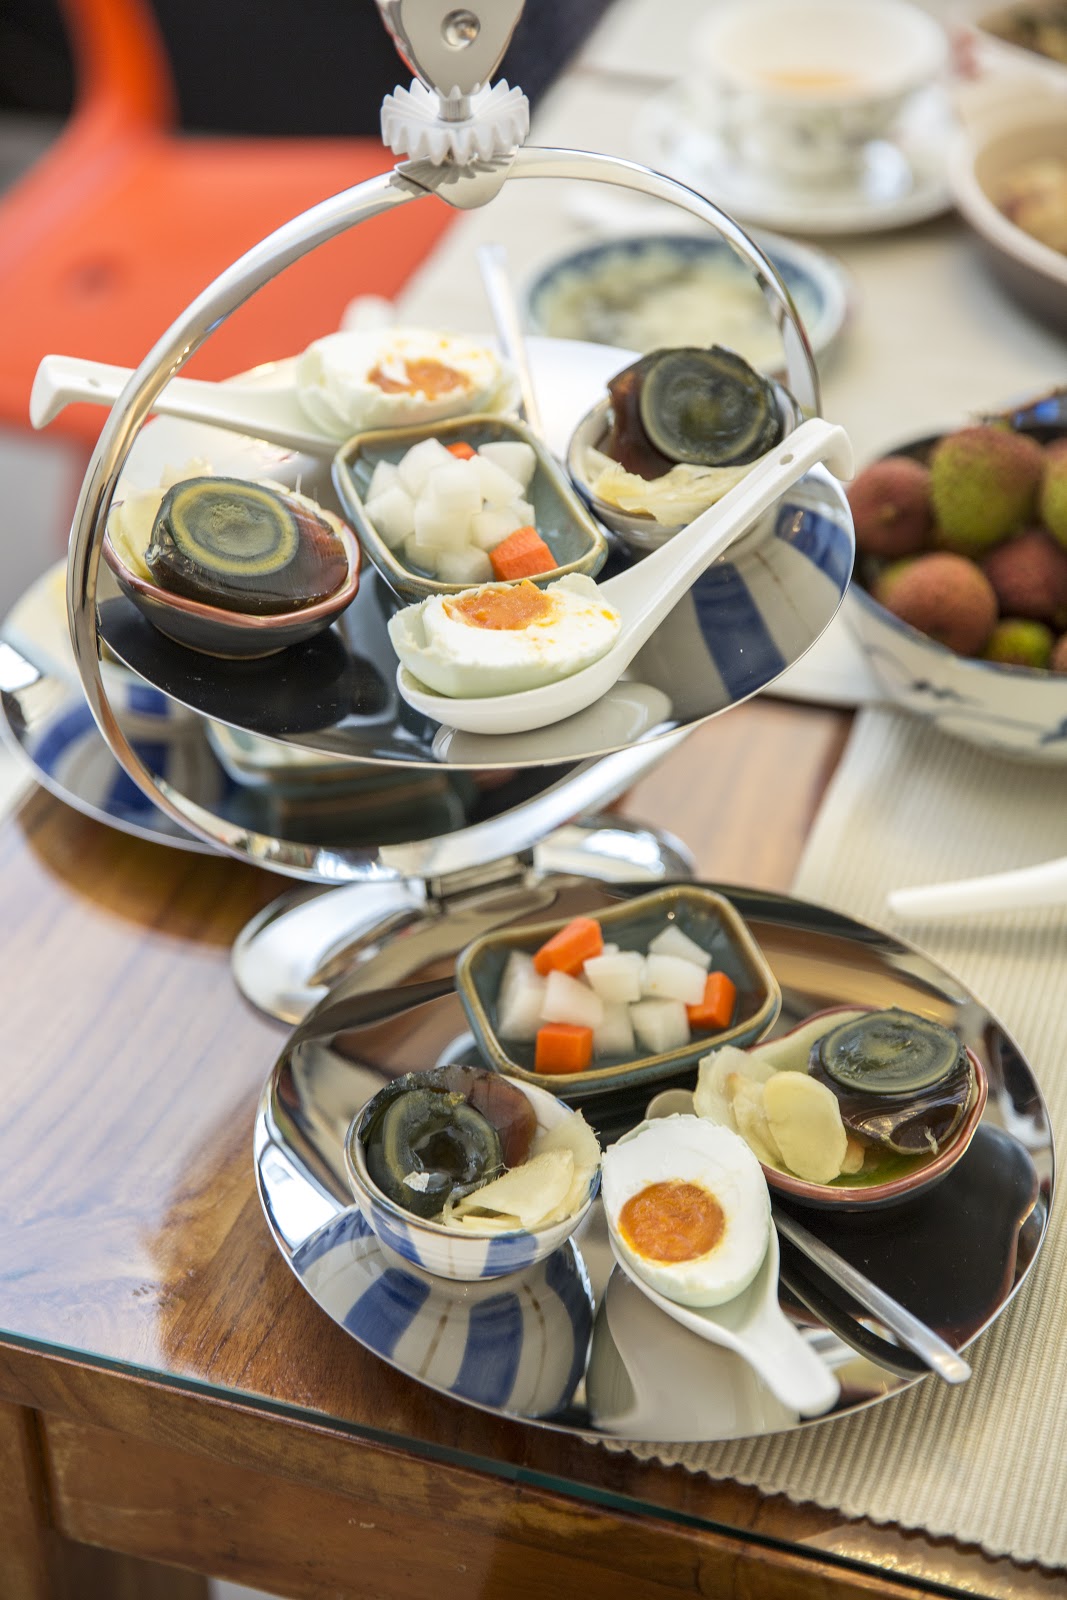 Congee is not complete without preserved vegetables and eggs